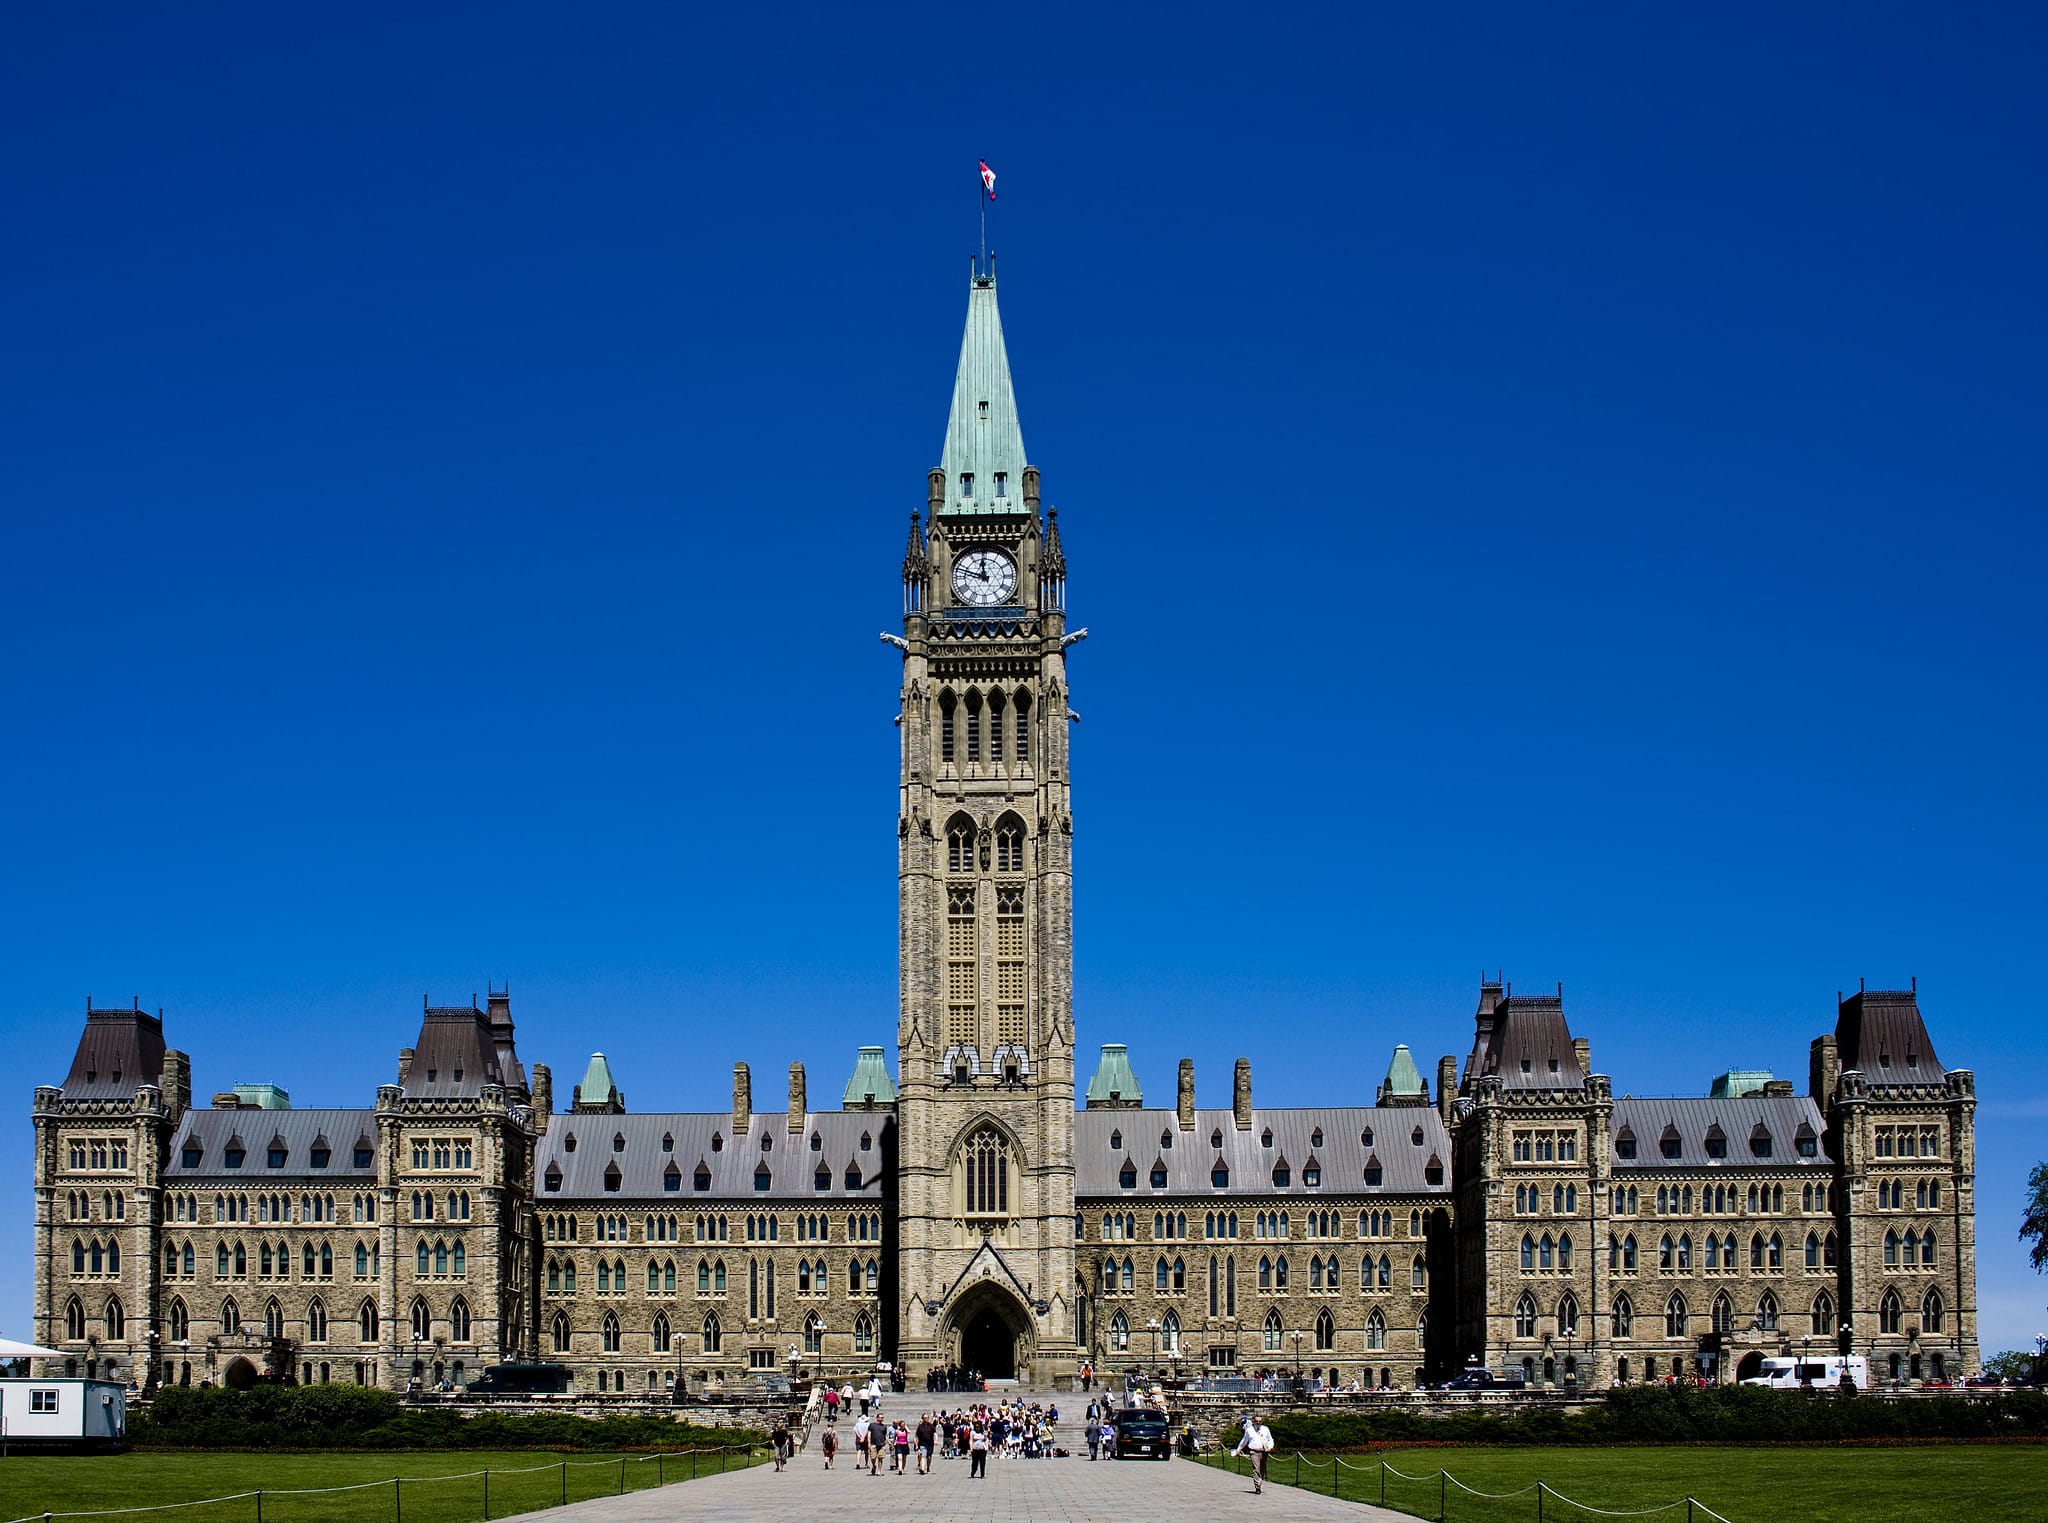 The centre block of the parliament buildings in ottawa, canada, with a large clock tower, under a clear blue sky.